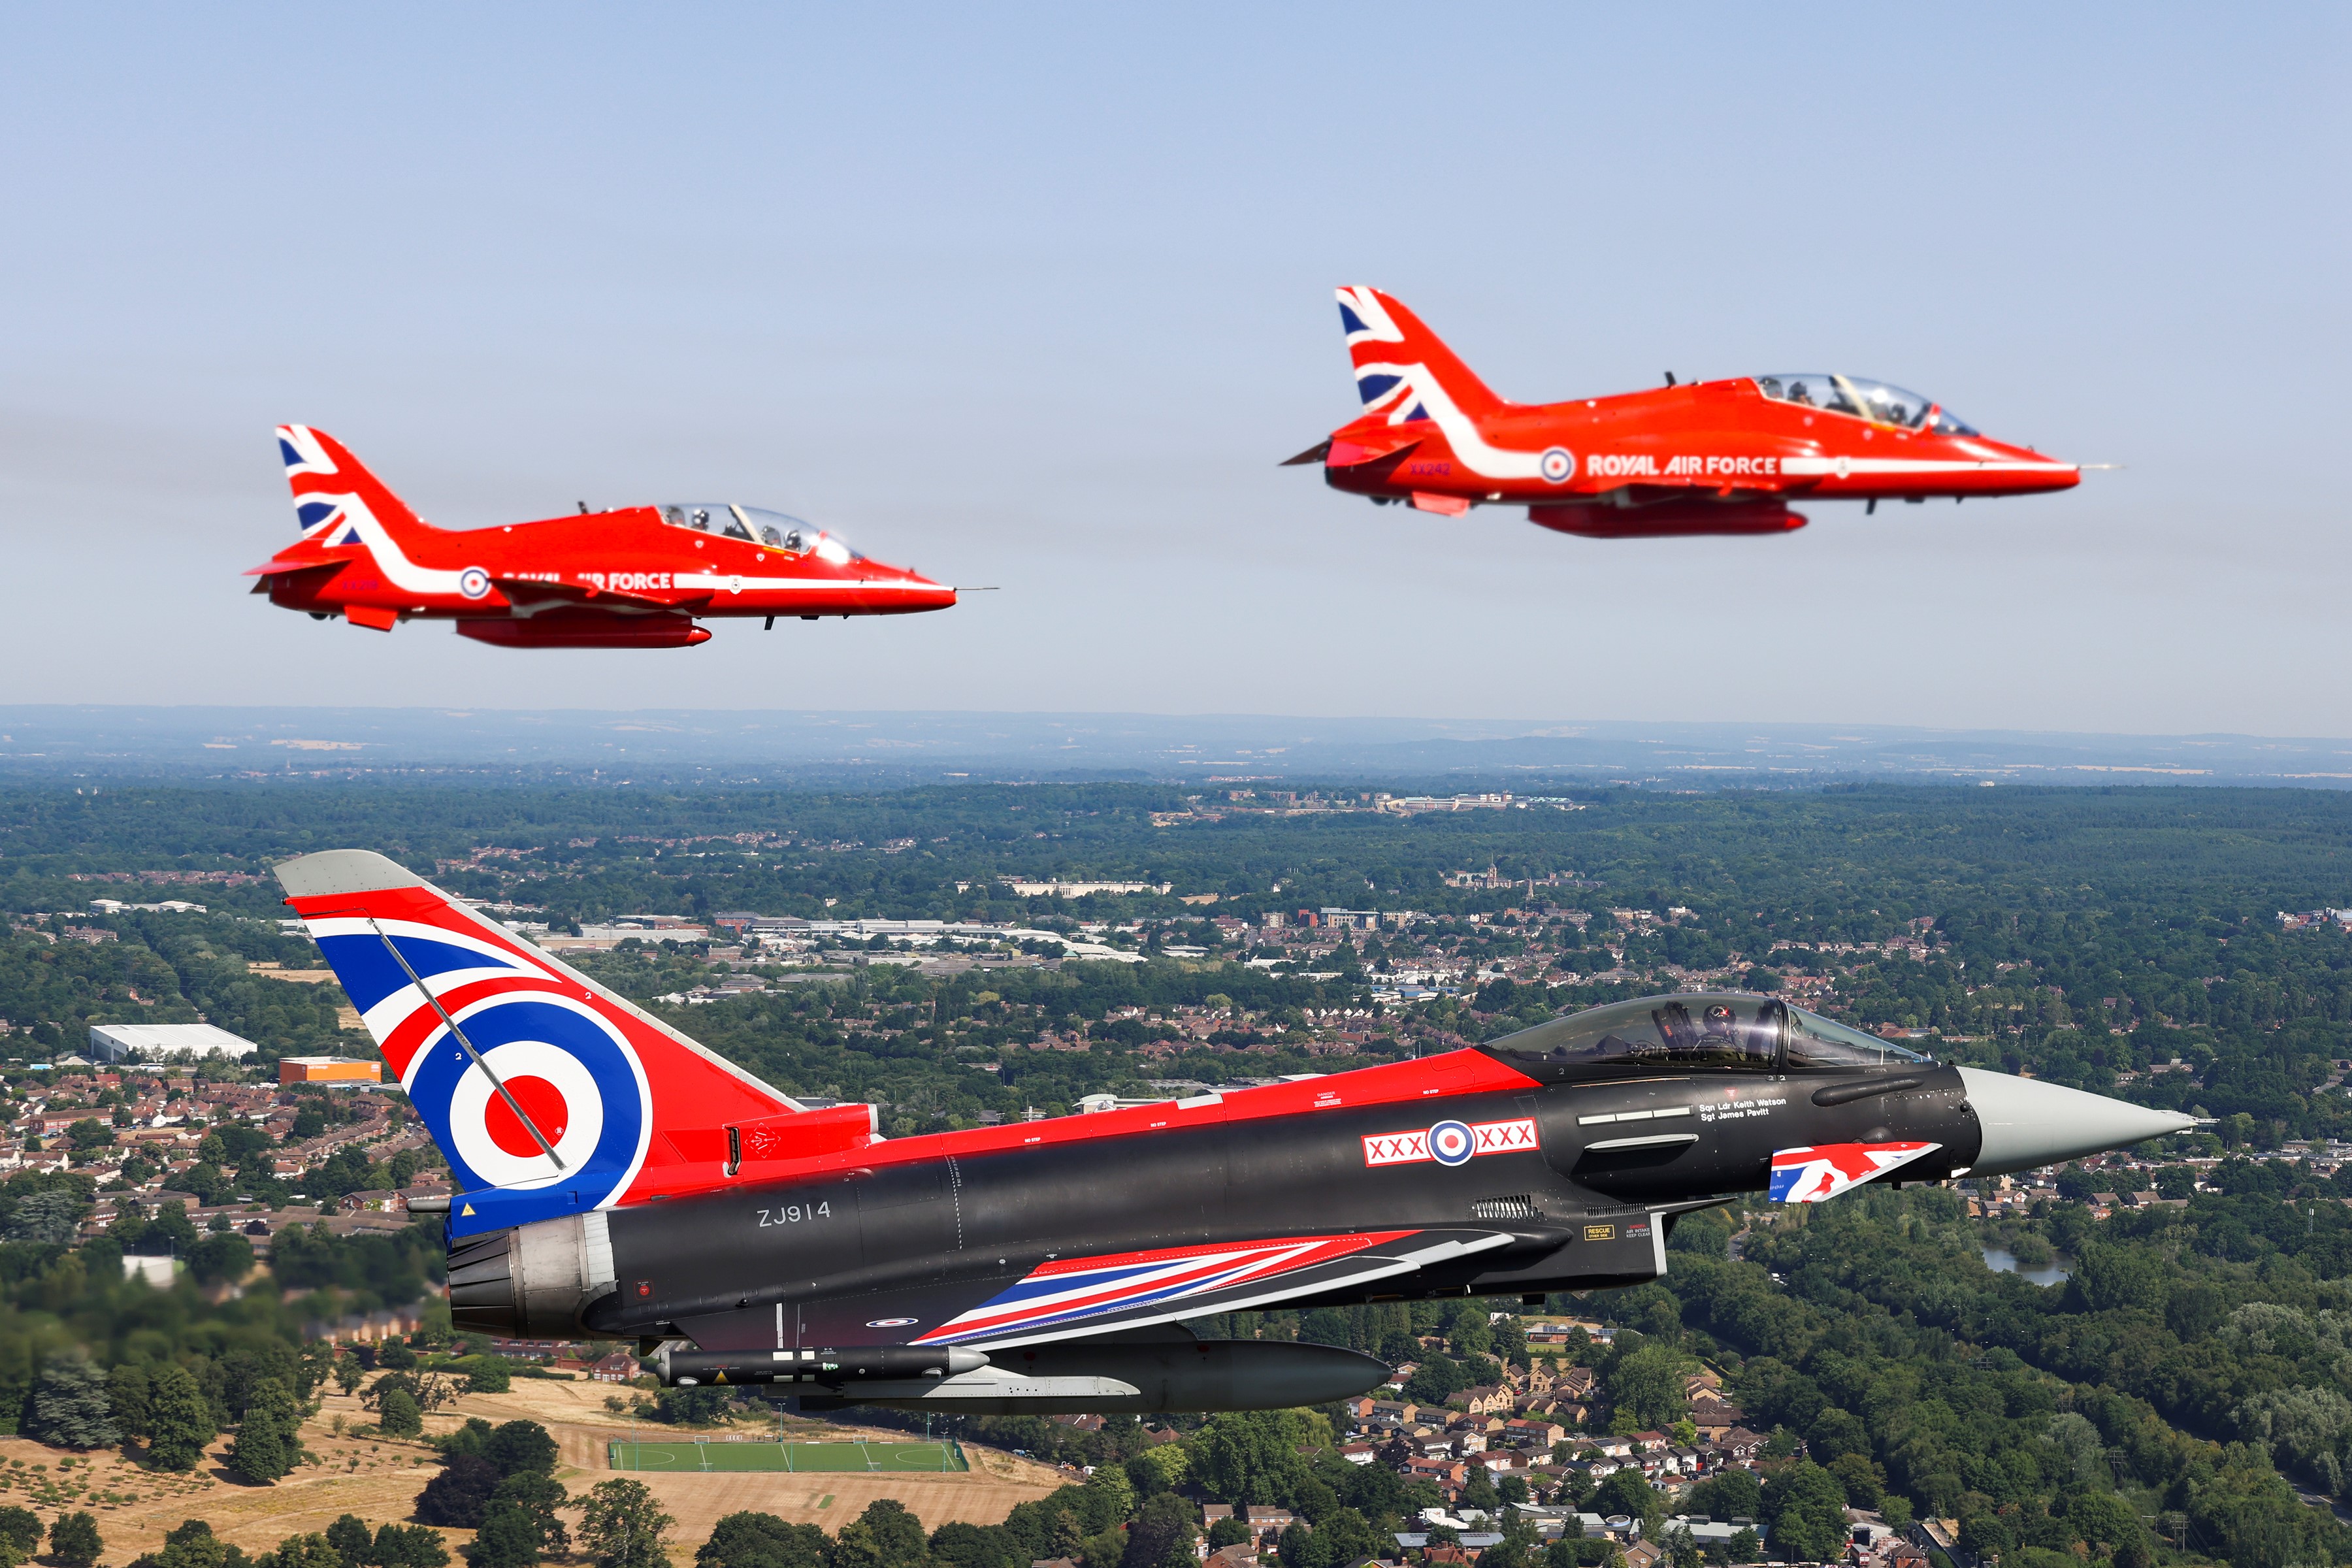 Image shows Red Arrows and Typhoon in flight.